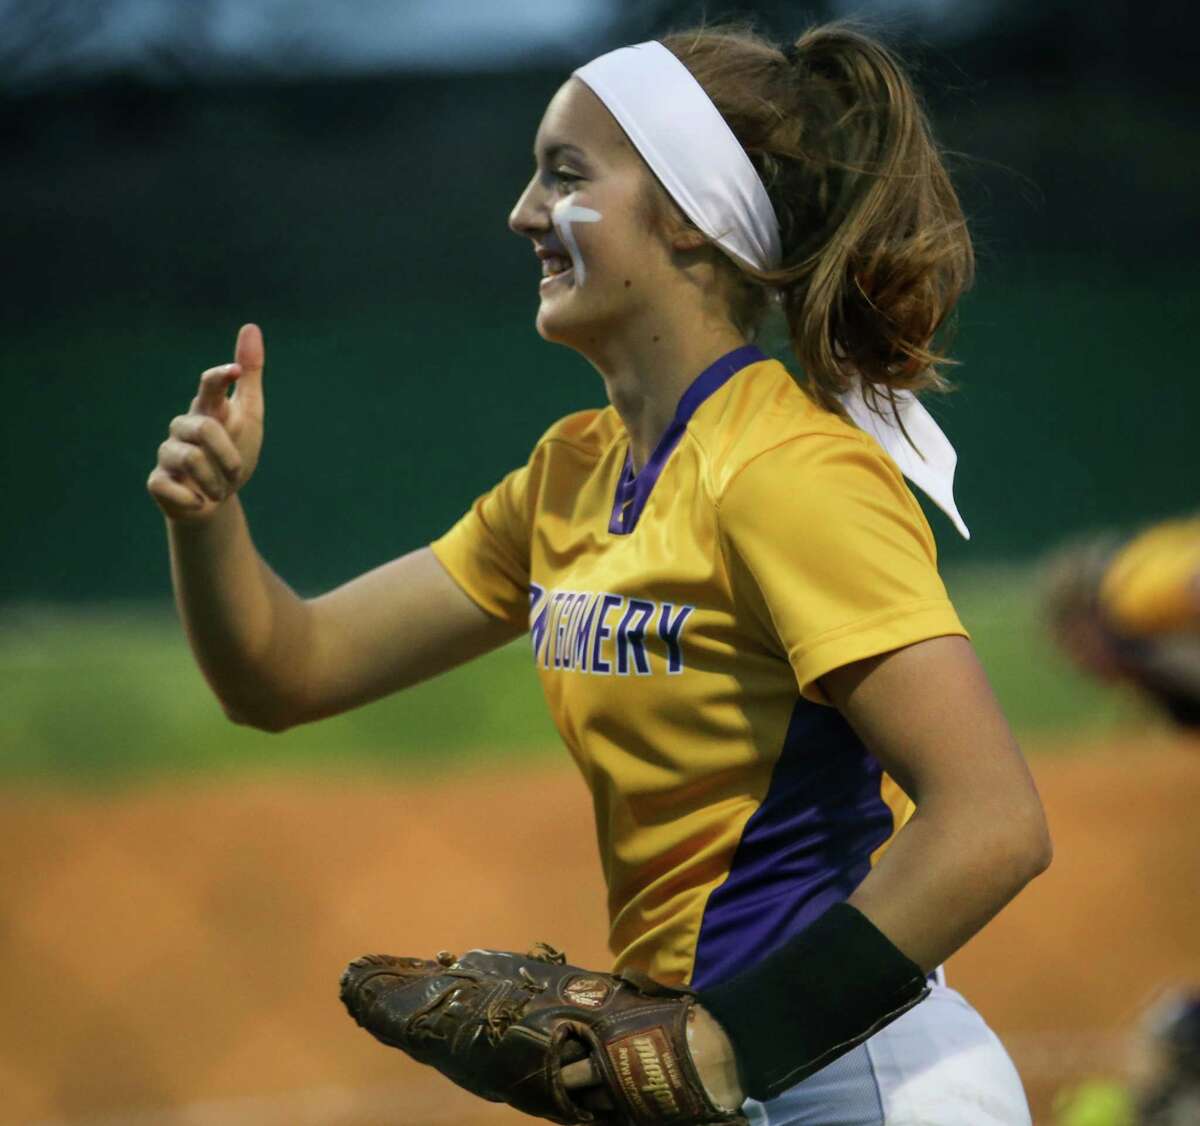 Montgomery's Maggie Hendrix (9) takes the field during the softball game against College Park on Friday, March 9, 2018, at Montgomery High School. (Michael Minasi / Houston Chronicle)